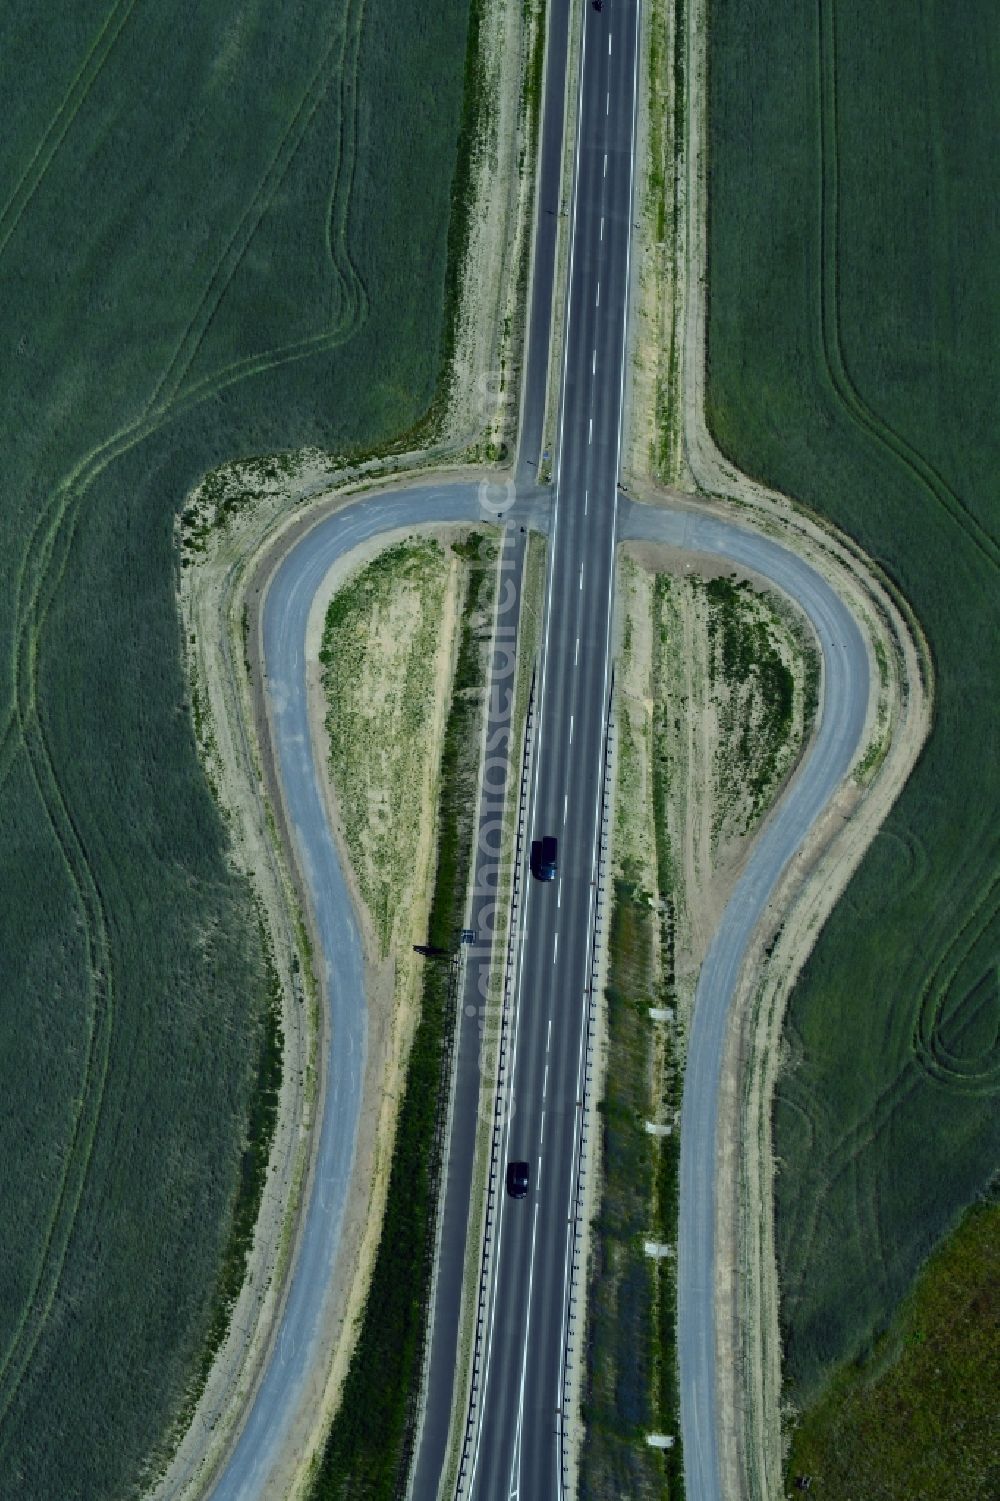 Aerial image Stahnsdorf - Construction of the bypass road L77 n in the district Gueterfelde in Stahnsdorf in the state Brandenburg, Germany